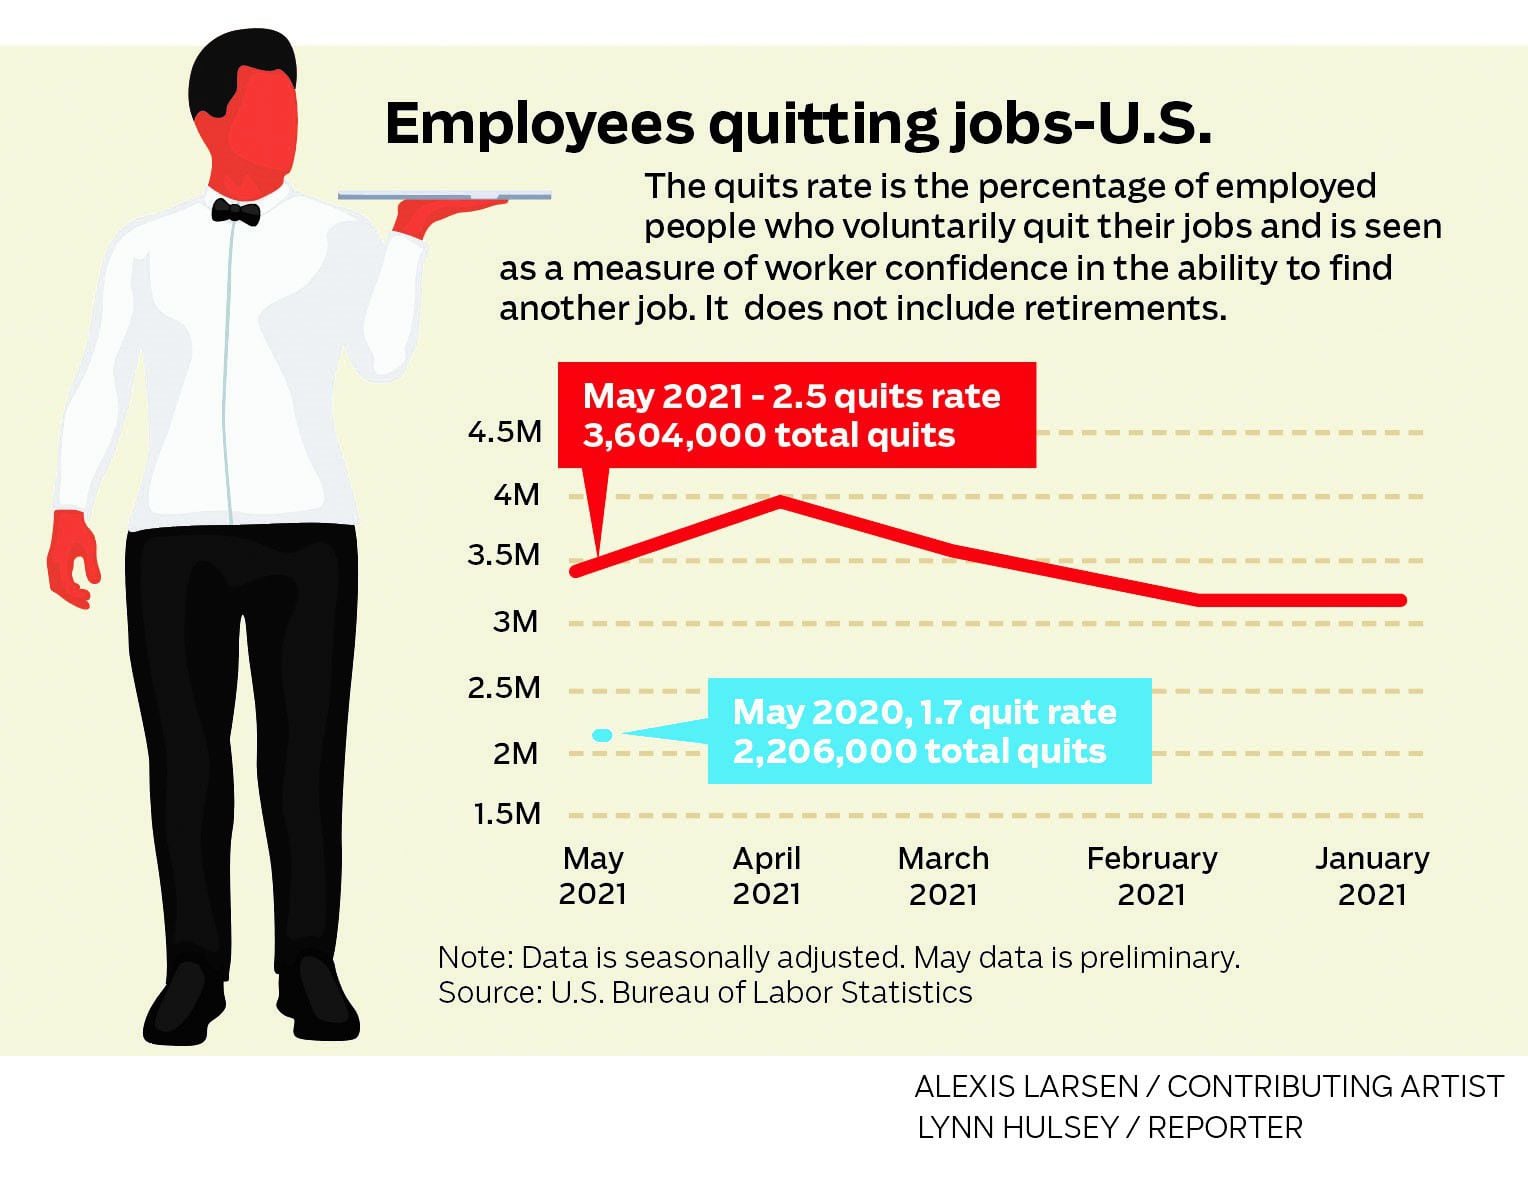 Employees quitting jobs at a high rate